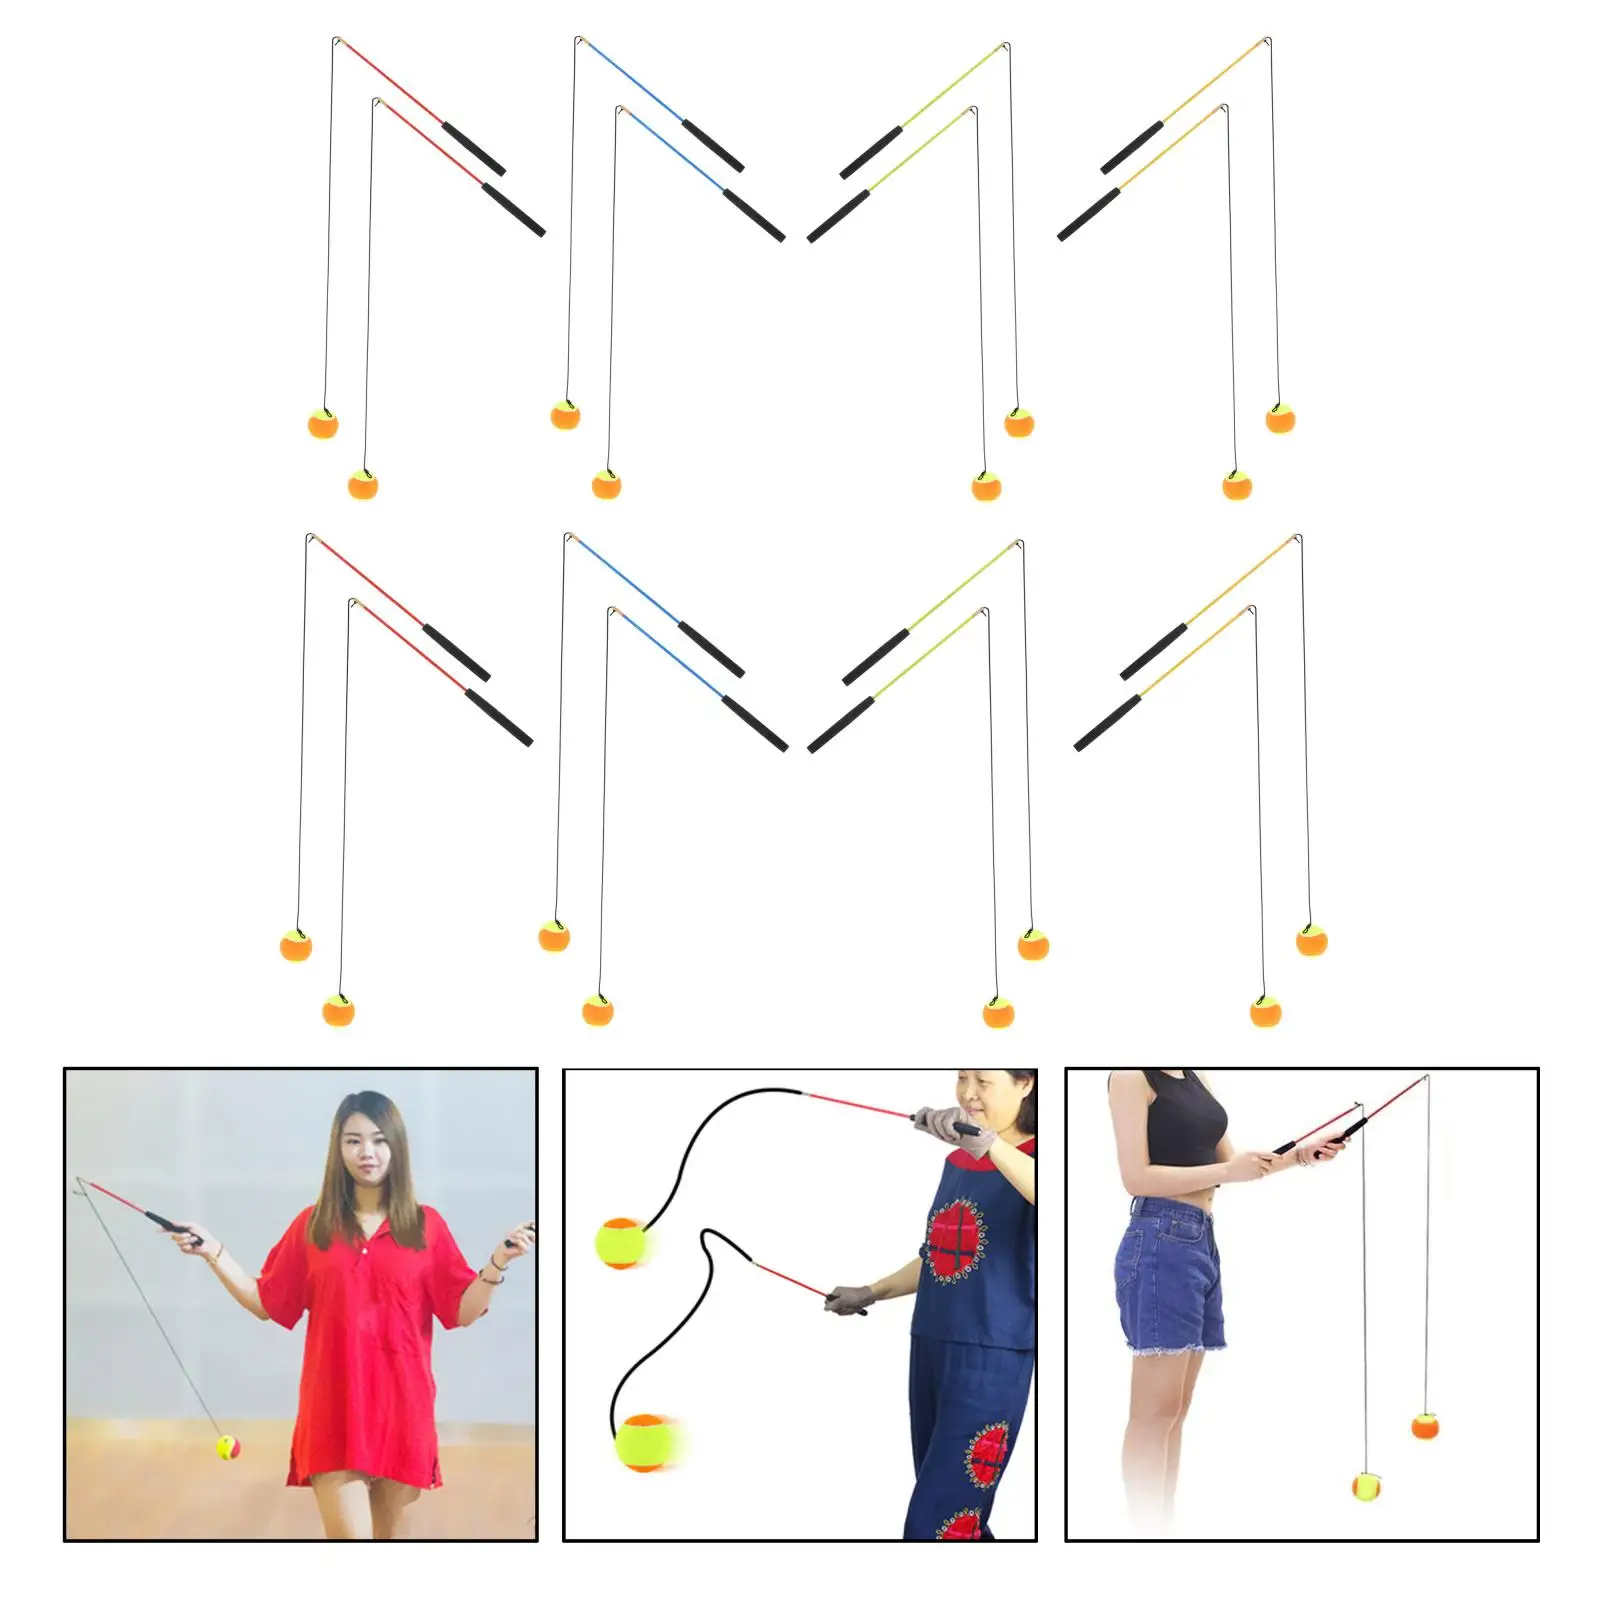 Fitness Ball with Rod Tennis Training Stretch Arm And Shoulder Joints Gym for Middle-Aged And Elderly Children Adults